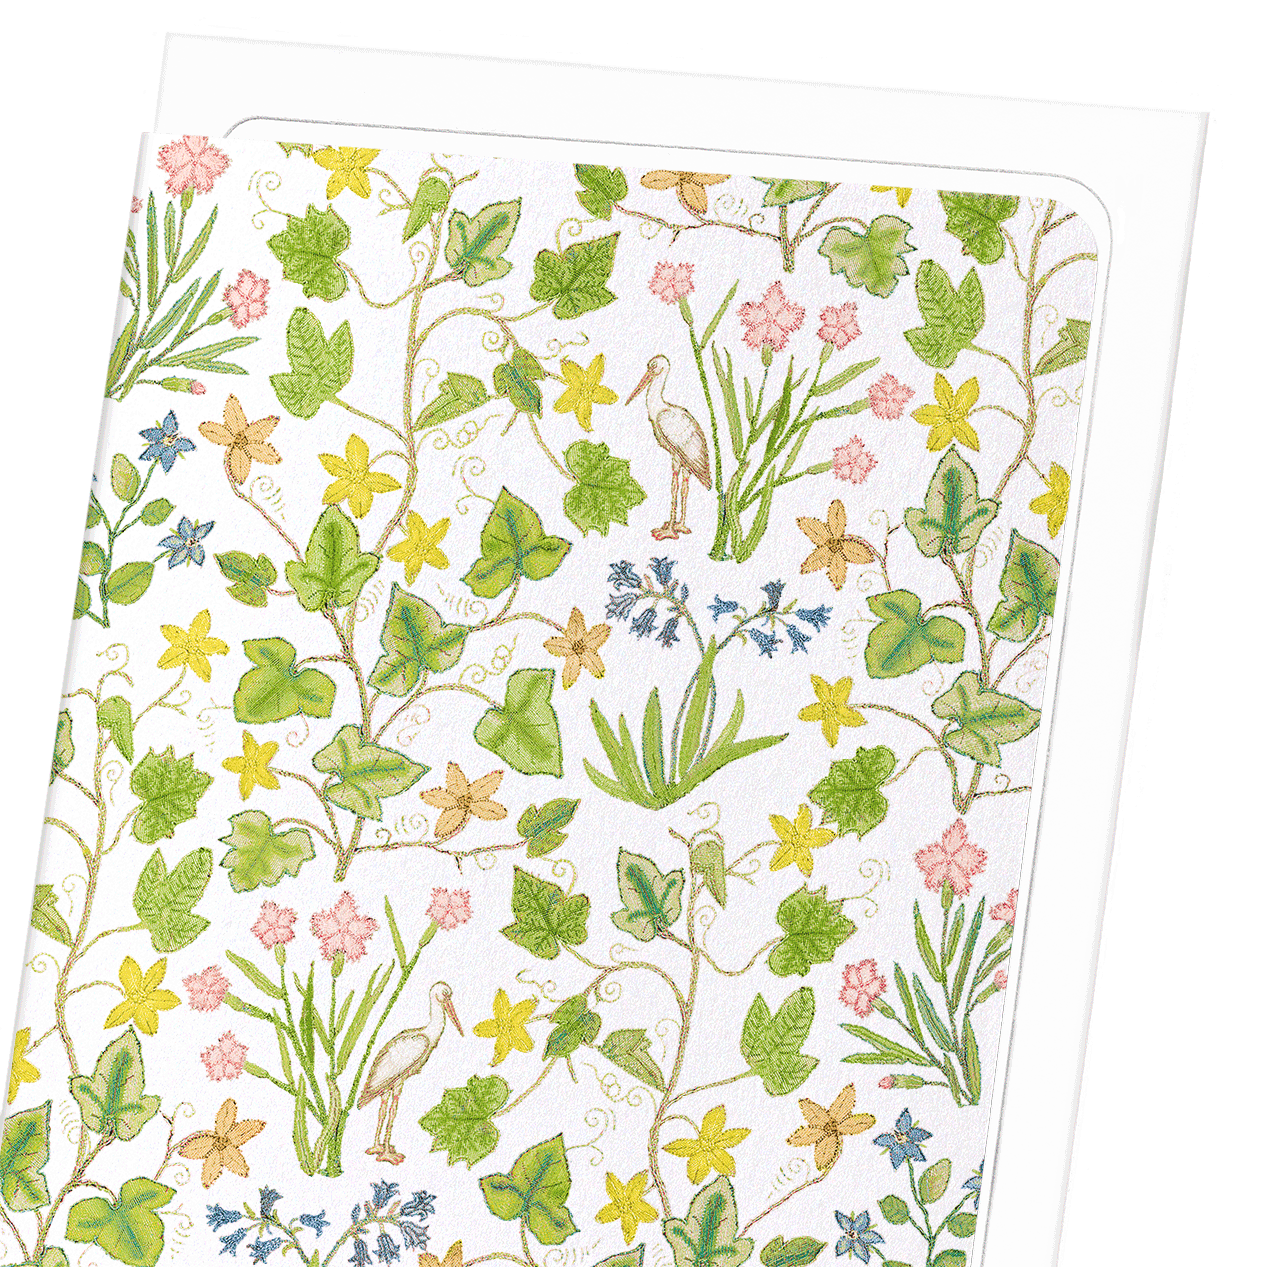 IVY AND FLOWERS ON WHITE (16TH C.): Pattern Greeting Card